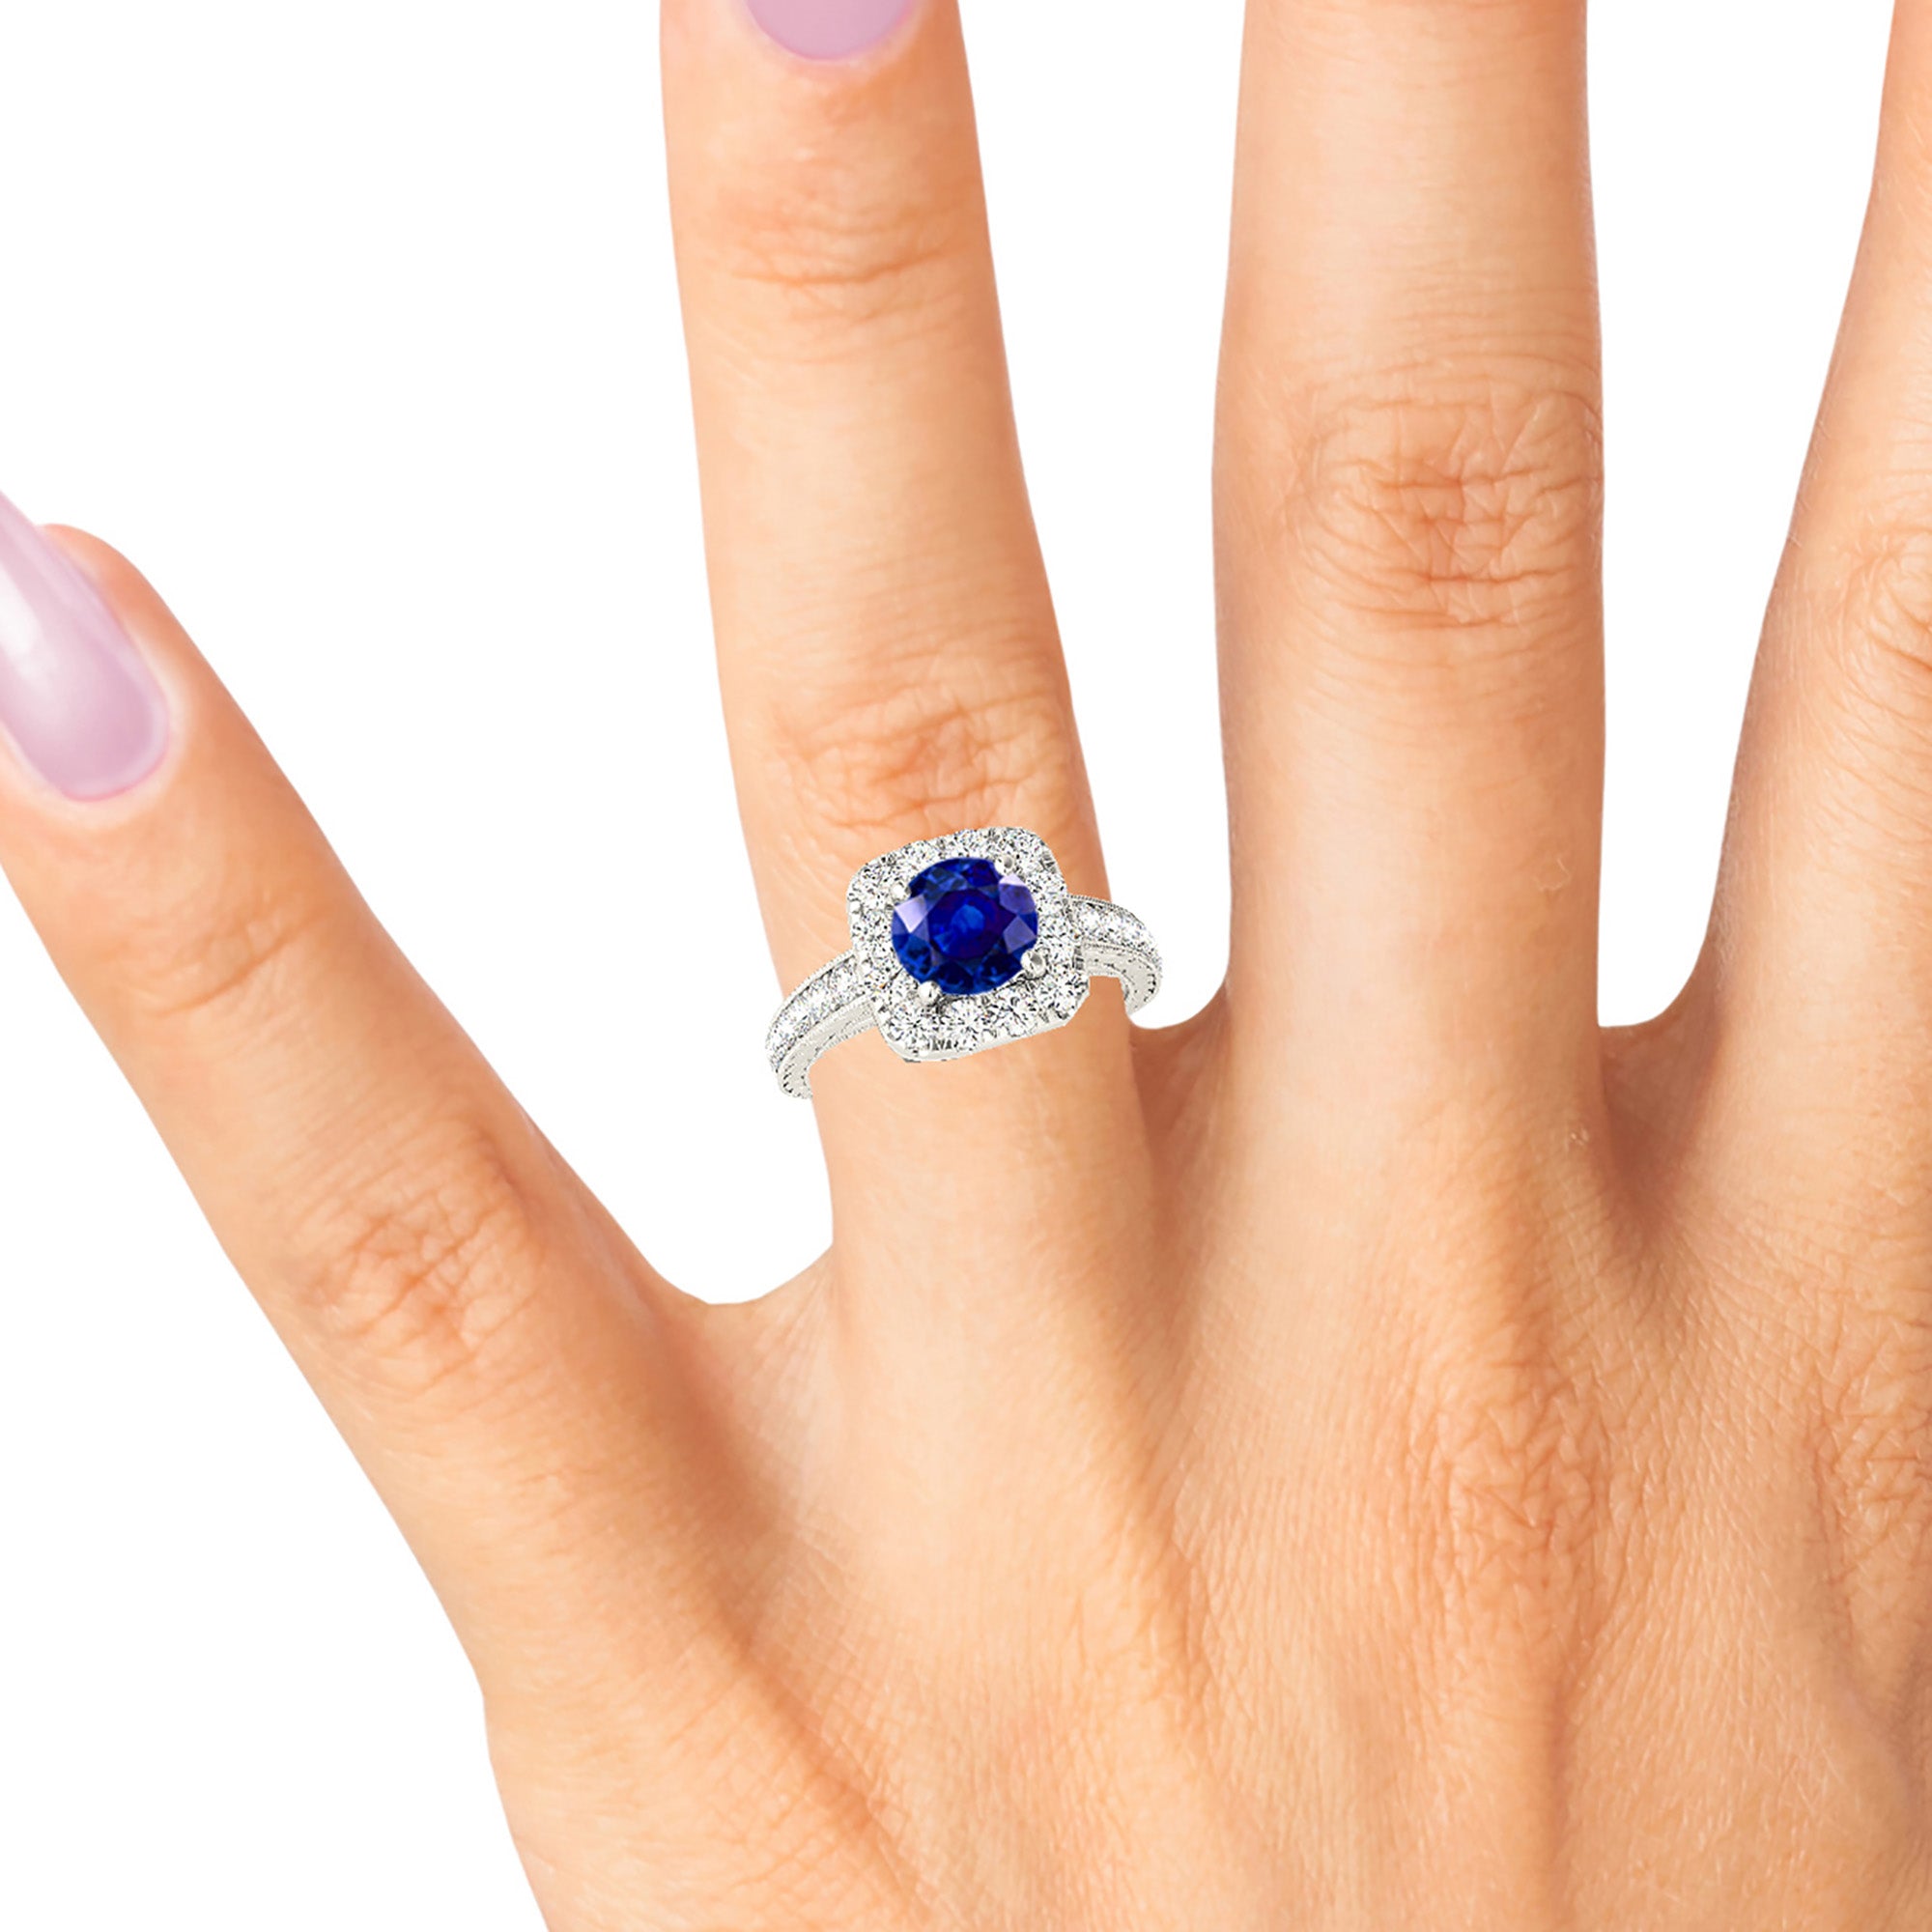 2.41 ct. Genuine Blue Sapphire Gallery Work Halo Ring with 0.50 ctw. Halo And Milgrain Hand Carved Band | Halo Blue Sapphire Classic Ring-in 14K/18K White, Yellow, Rose Gold and Platinum - Christmas Jewelry Gift -VIRABYANI